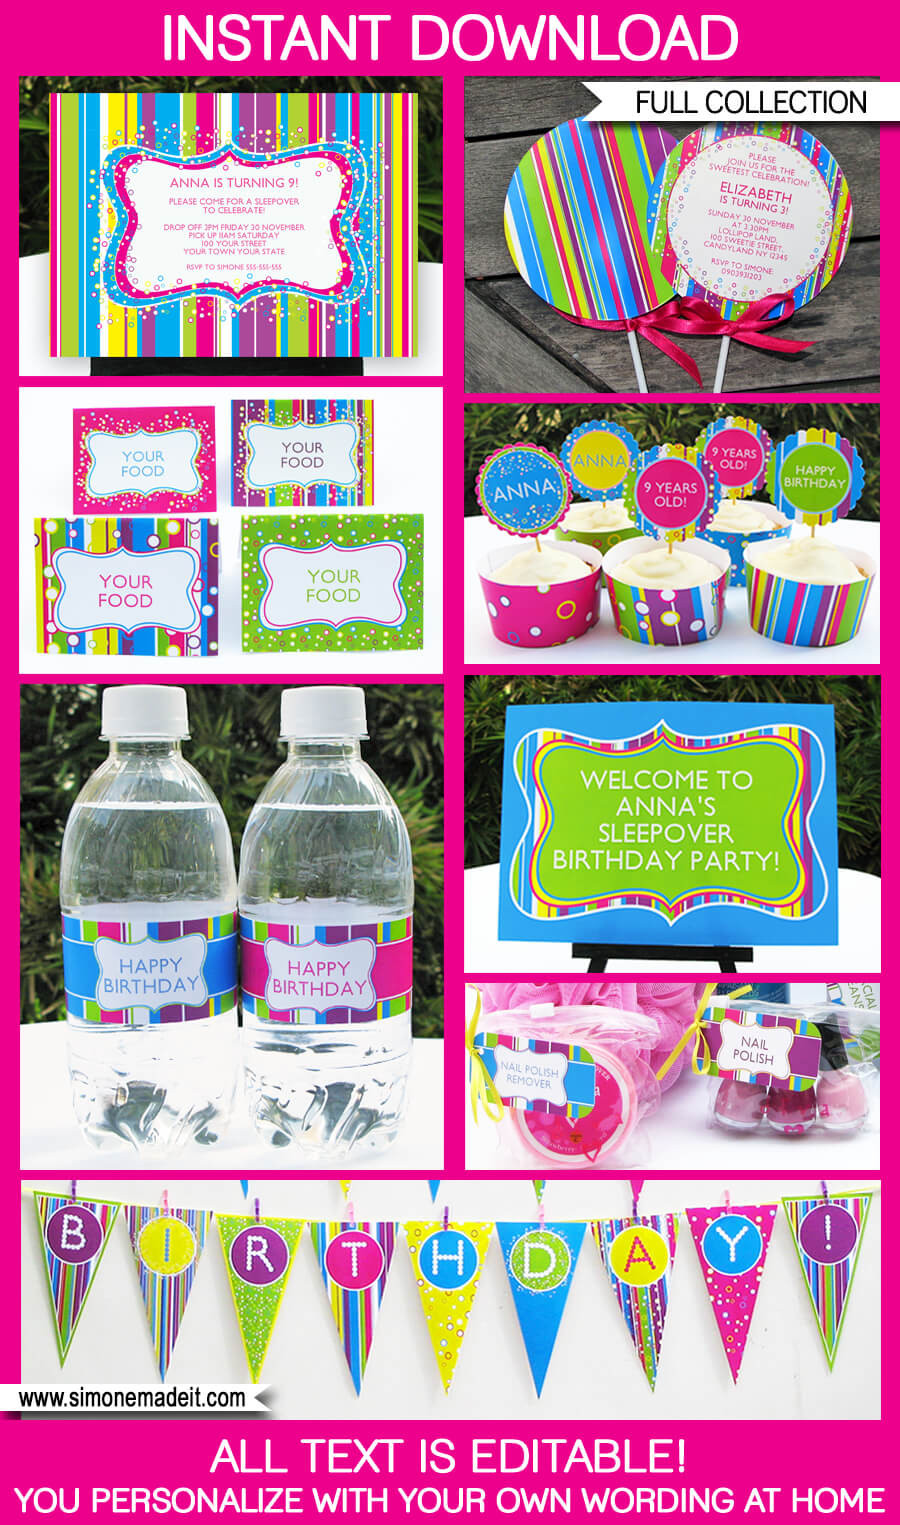 Free Birthday Party Printables Decorations
 Candyland Party Printables Invitations & Decorations